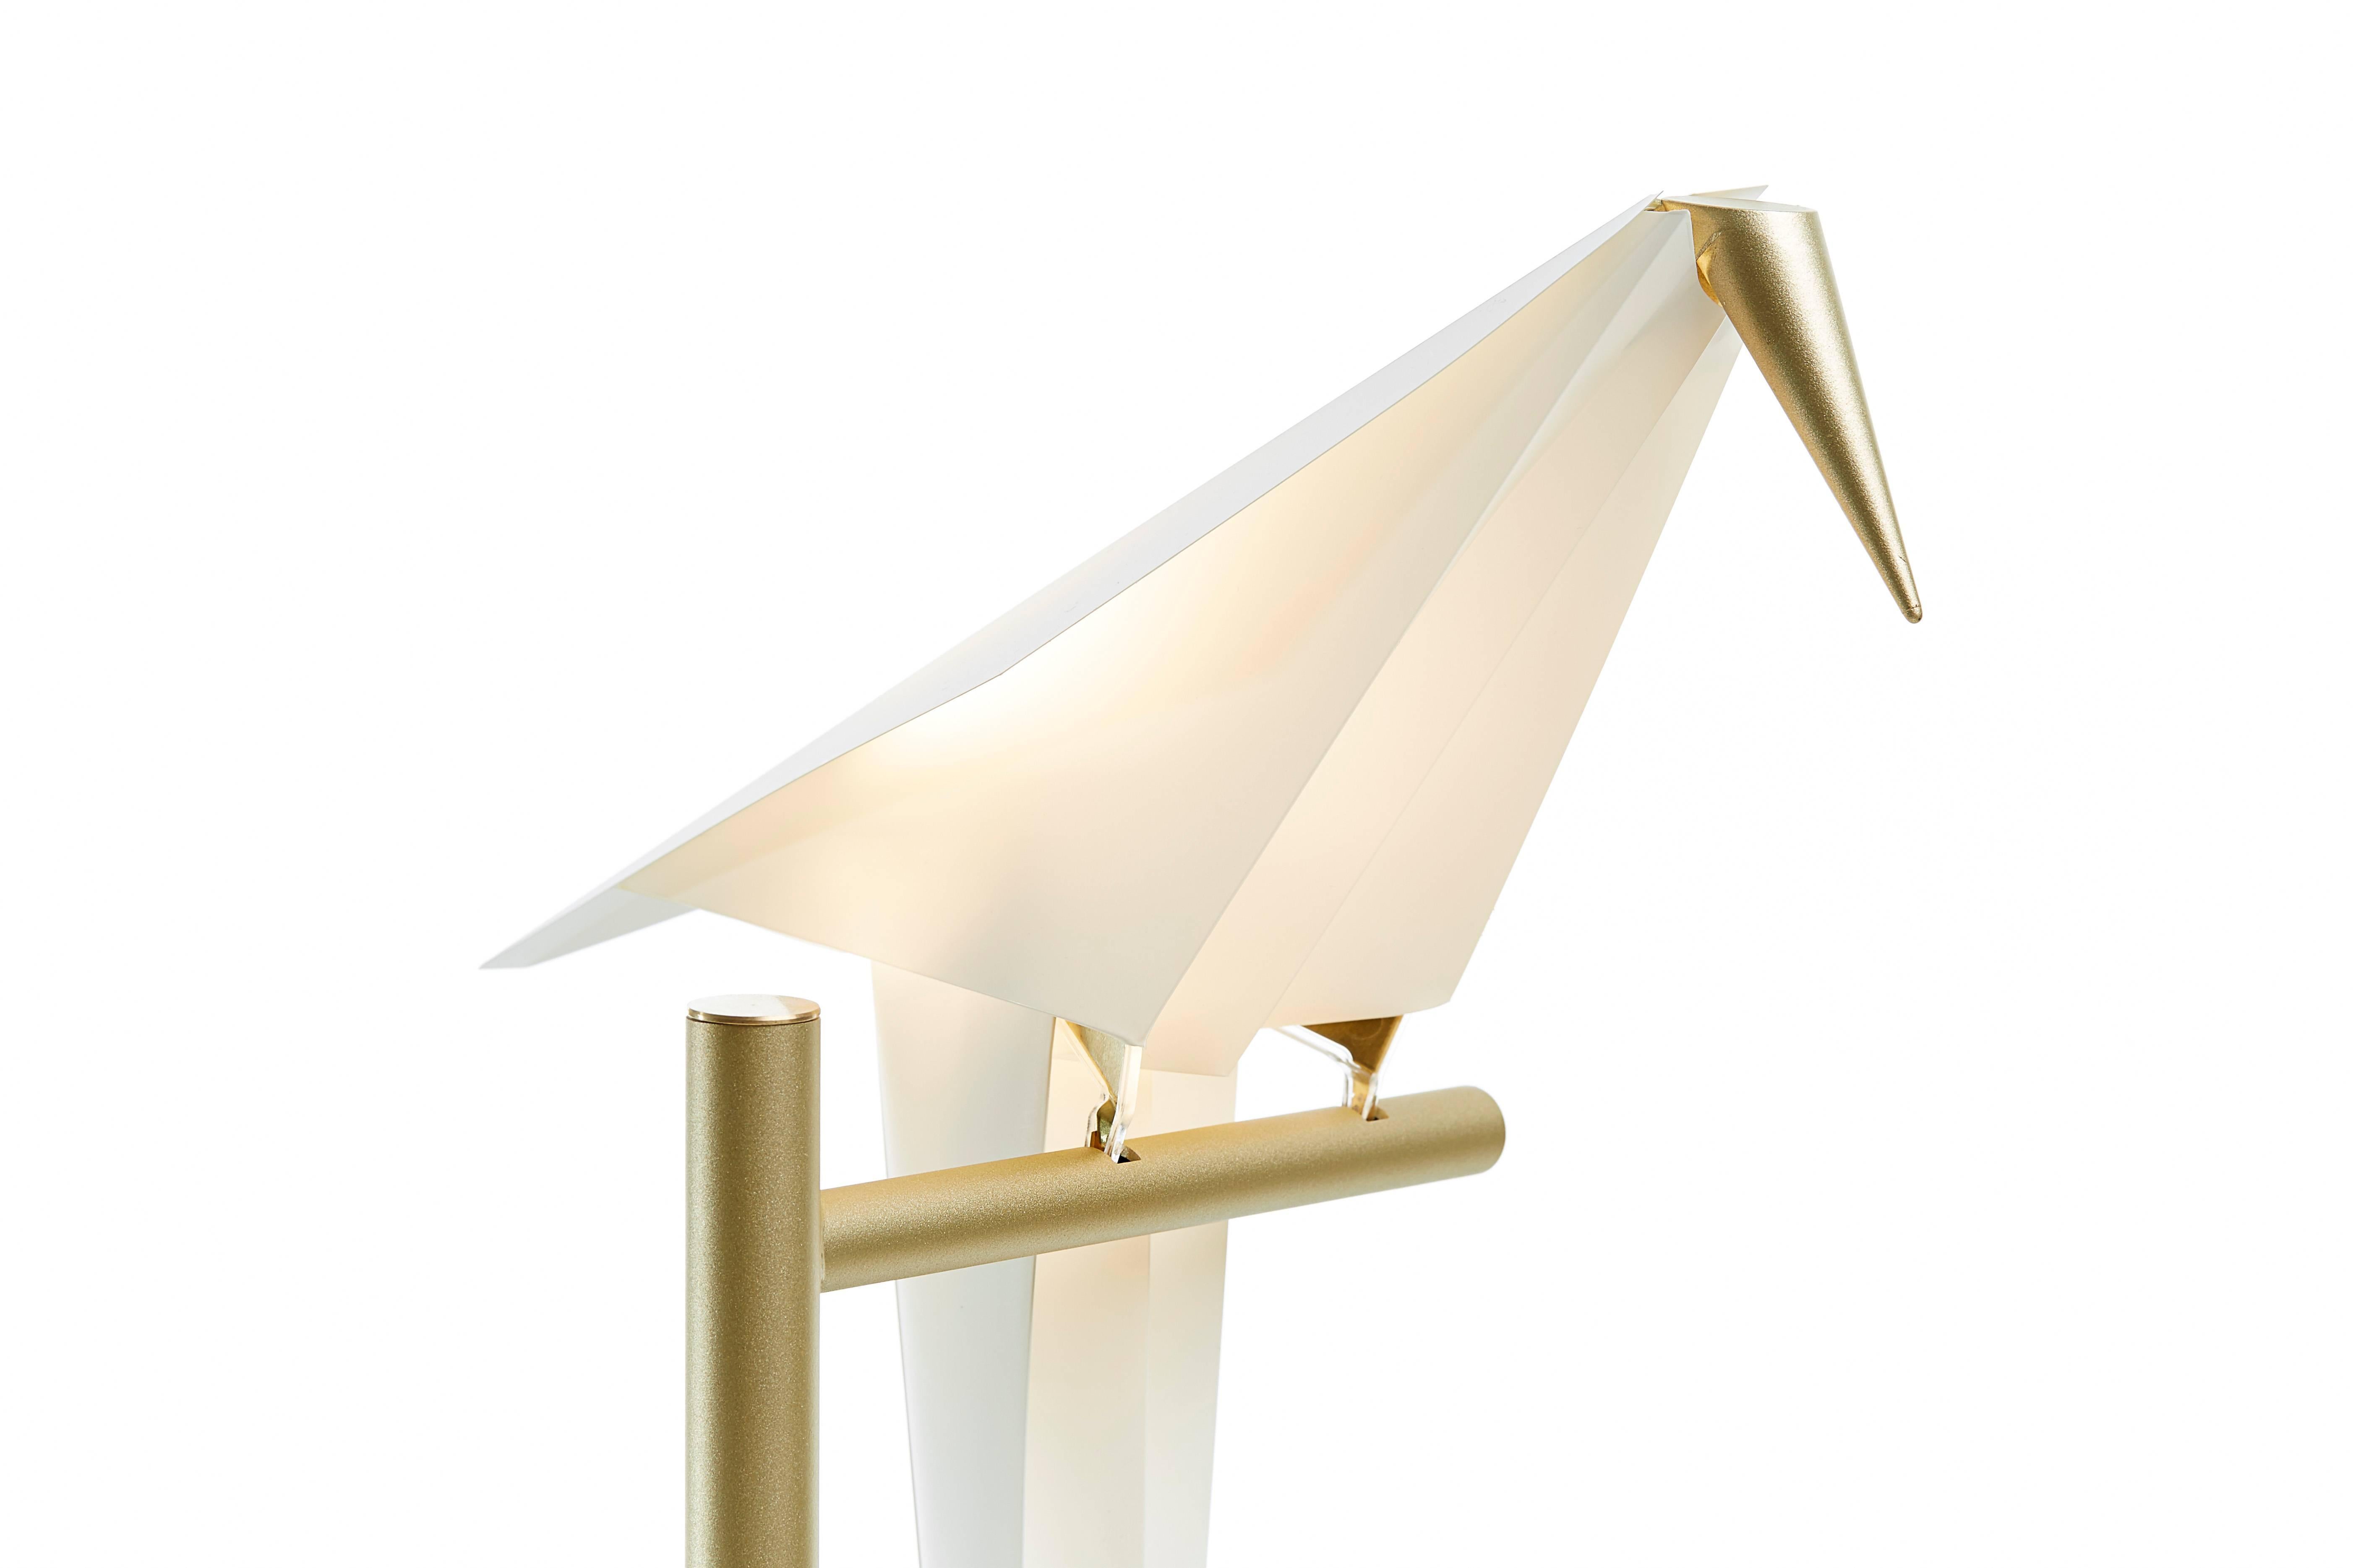 You may admire the details of its delicate beauty and follow the light swinging of the bird from nearby, while comfortably seated. What’s more, you can easily set it in motion with a gentle touch of your hand while enjoying its warm sunny glow.

A